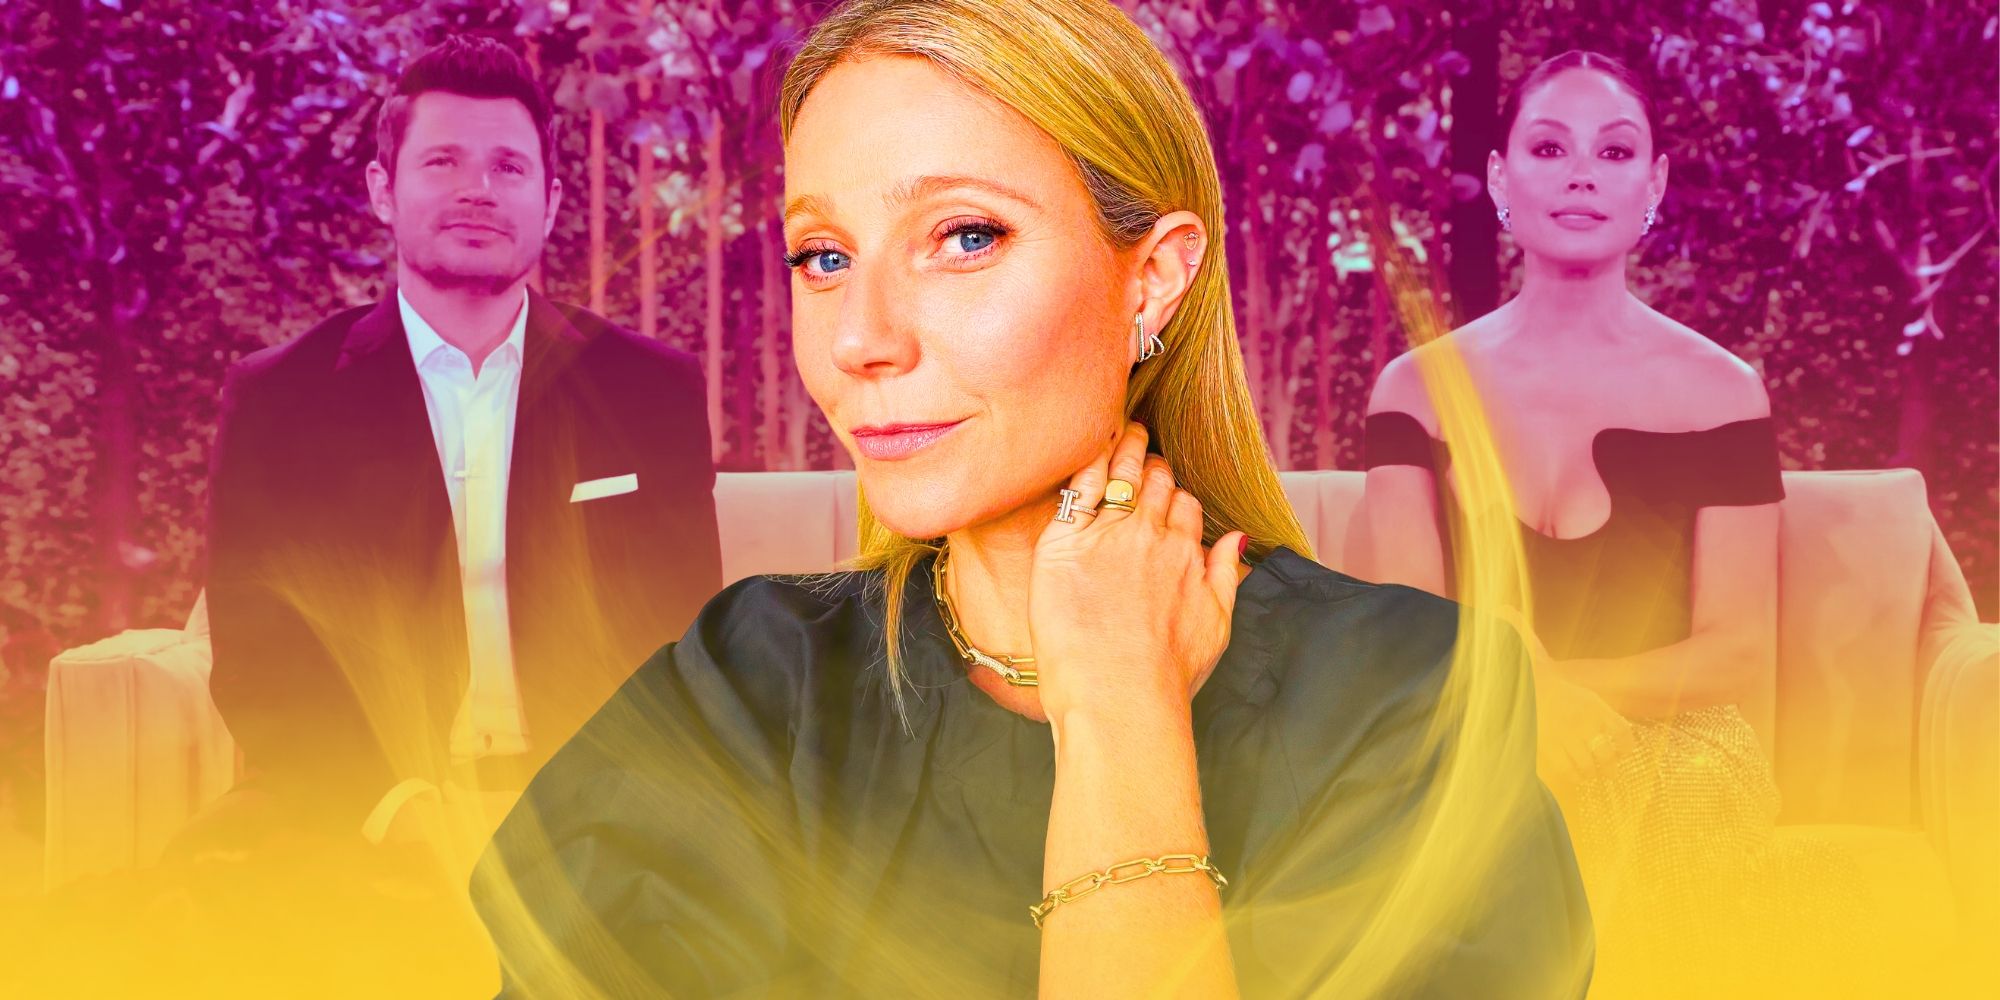 Gwyneth Paltrow, with Love Is Blind hosts Nick and Vanessa Lachey sitting behind her